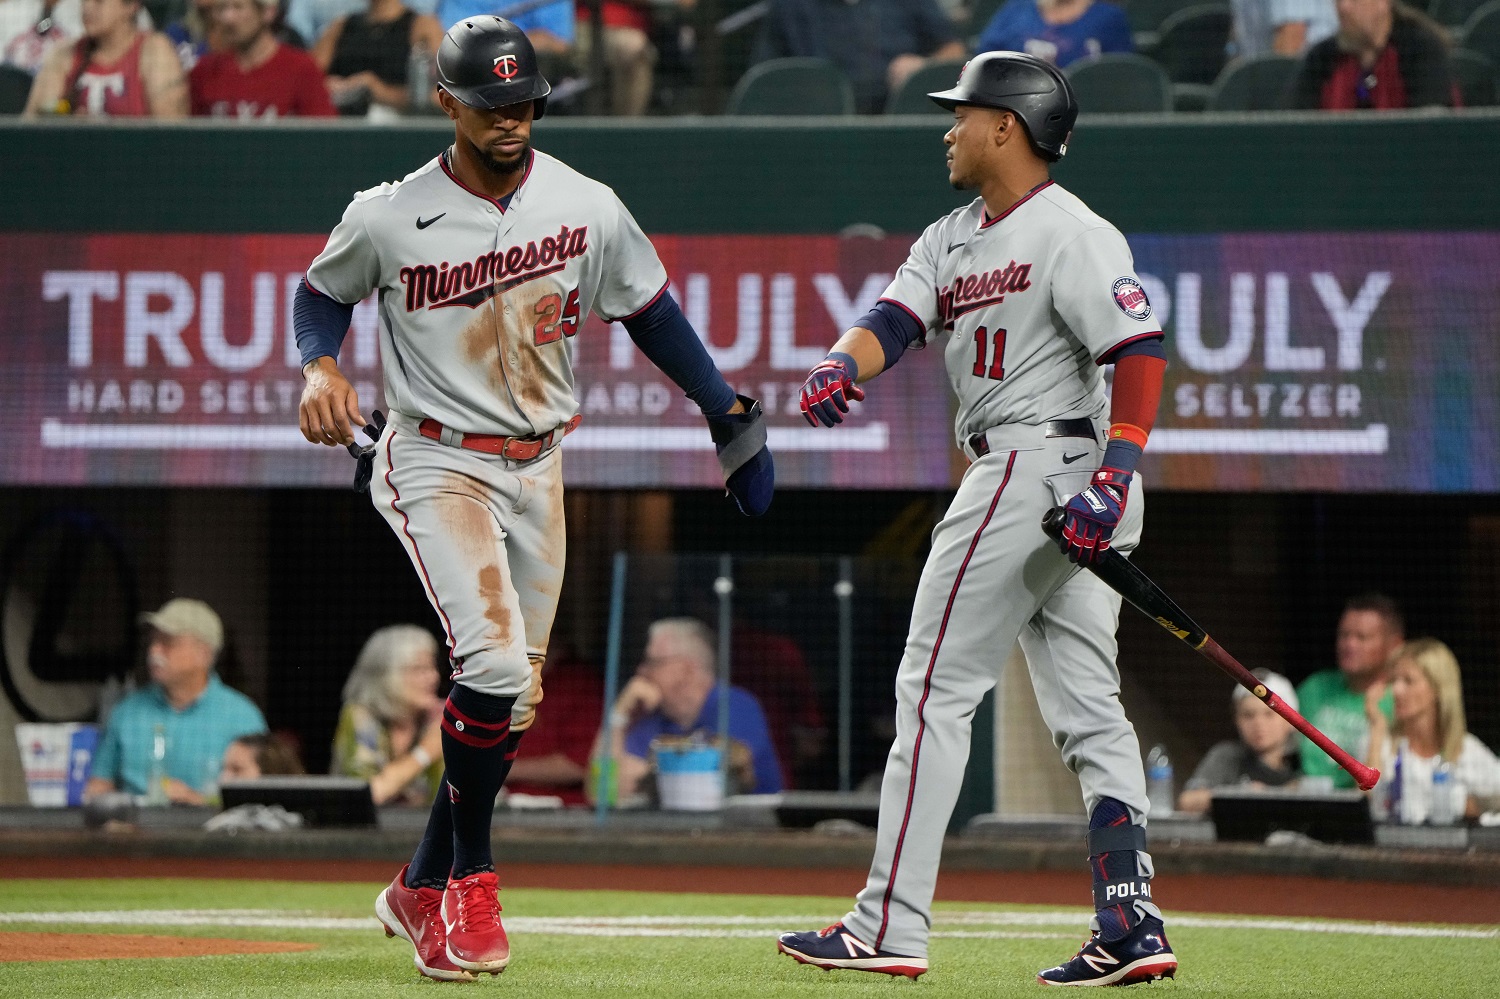 Believe in Buxton for 2023 - Twins - Twins Daily